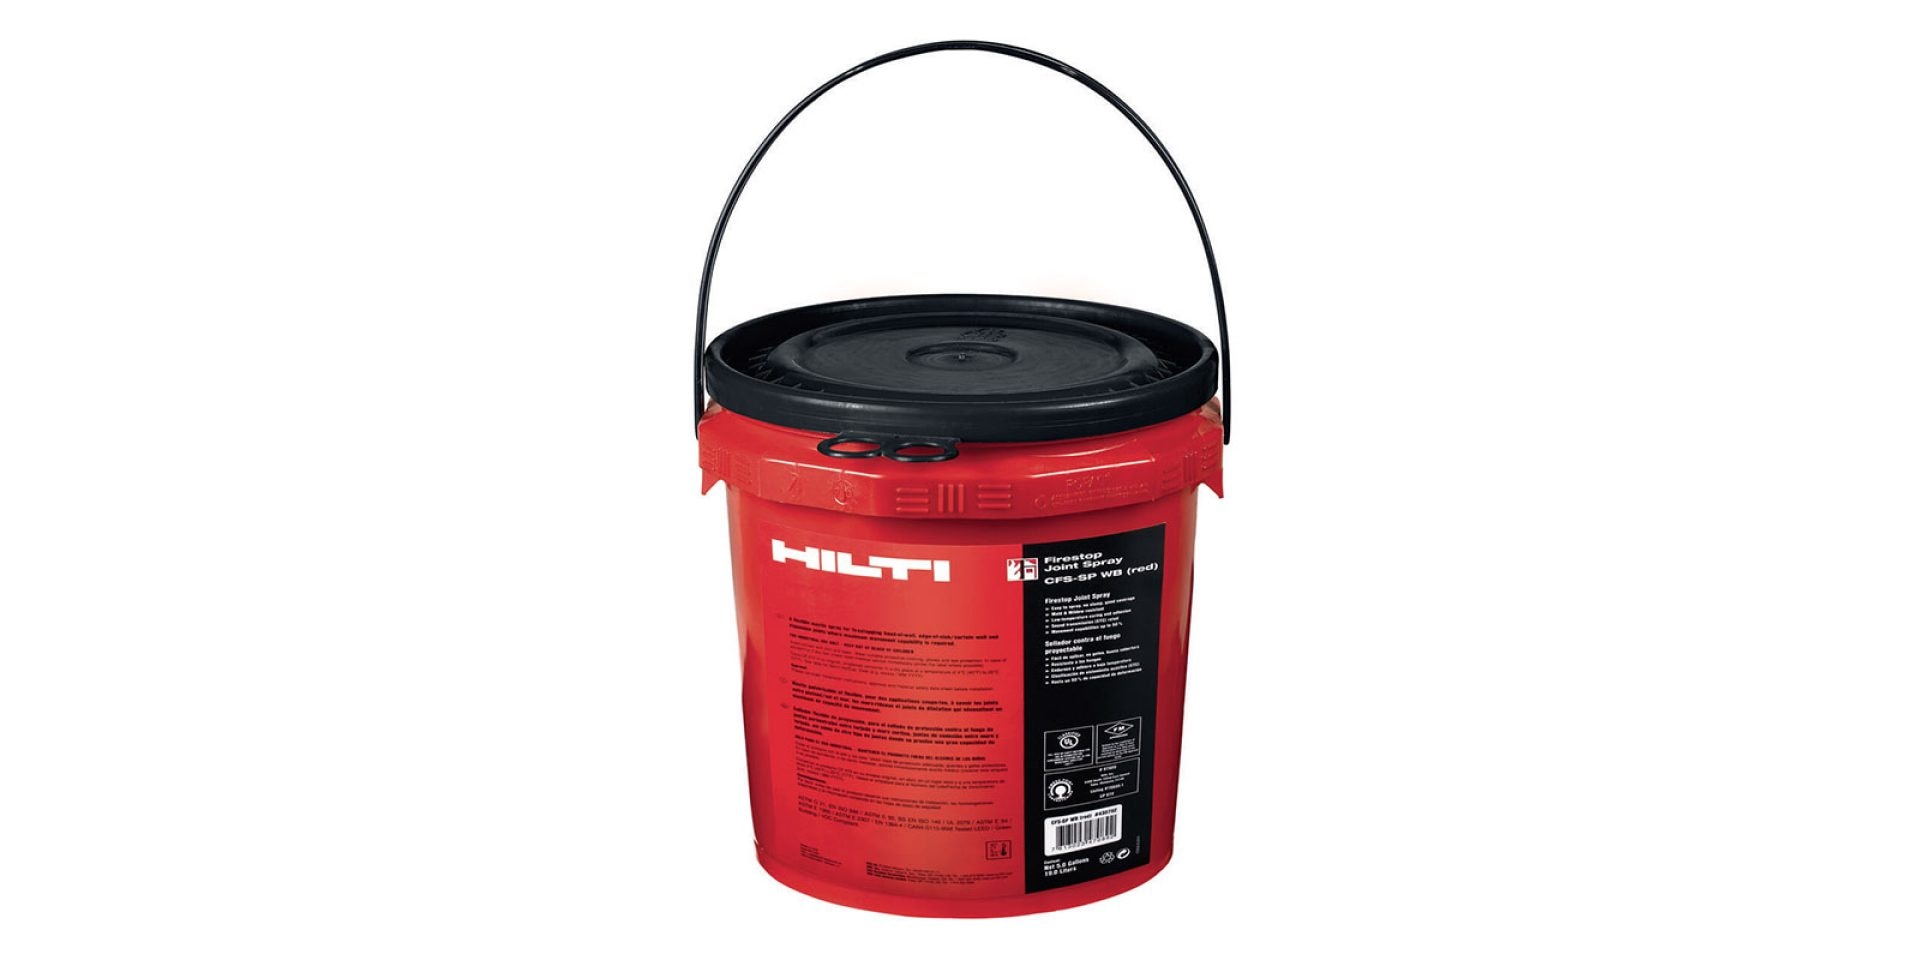 Hilti CFS-SP SIL Firestop Silicone joint spray